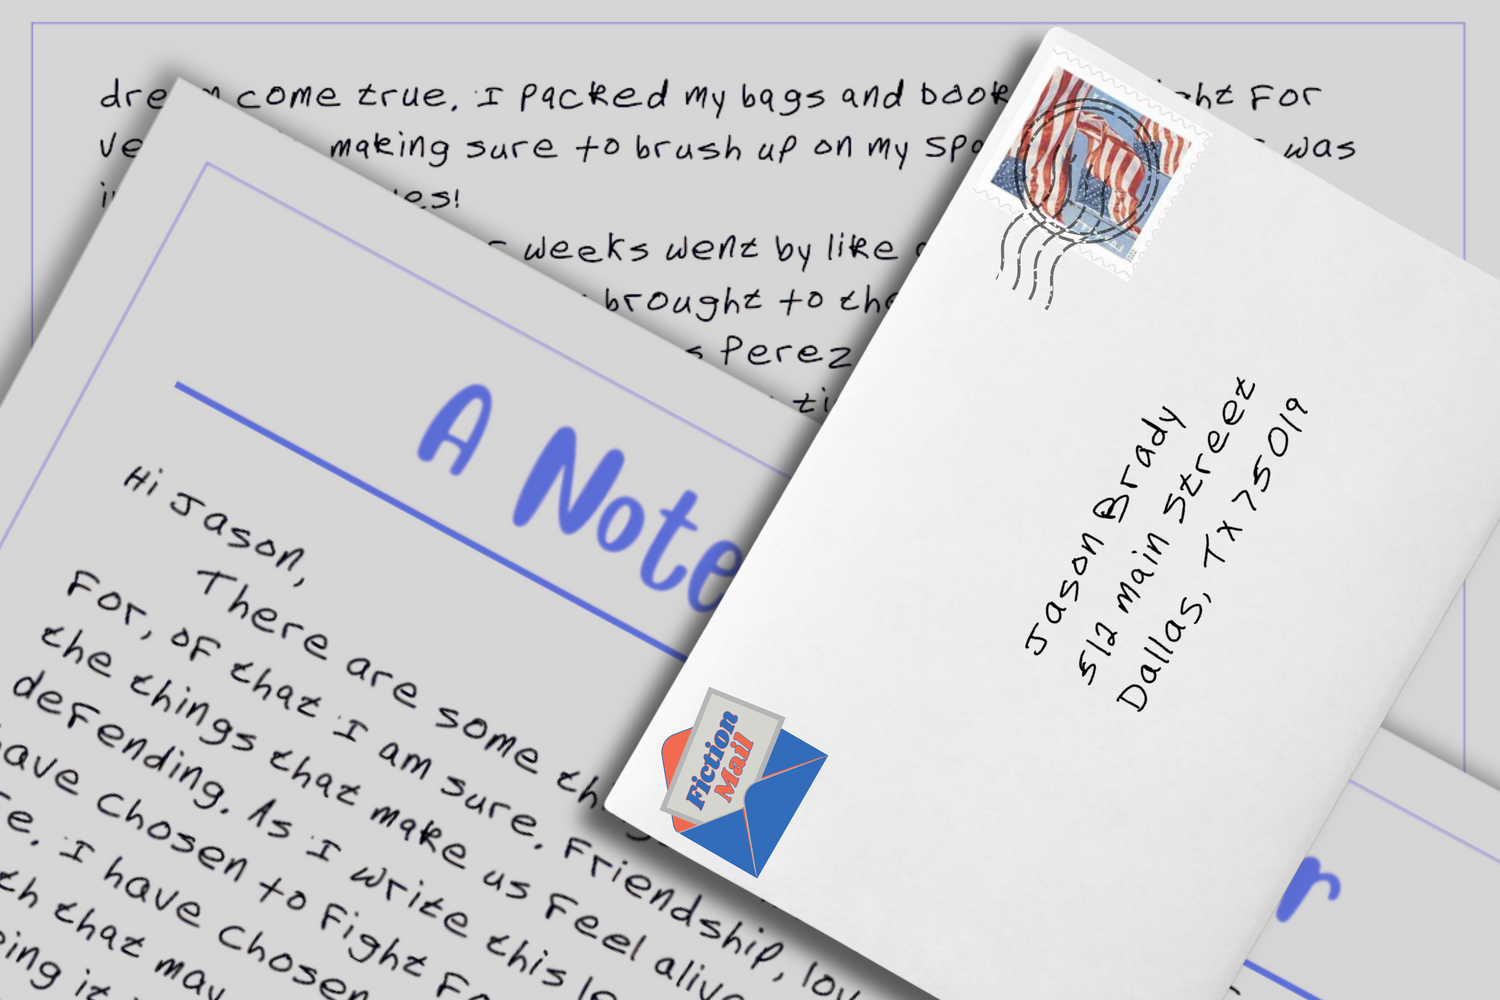 Fiction Mail is amazing fiction sent to you as personalized letters from an old friend!